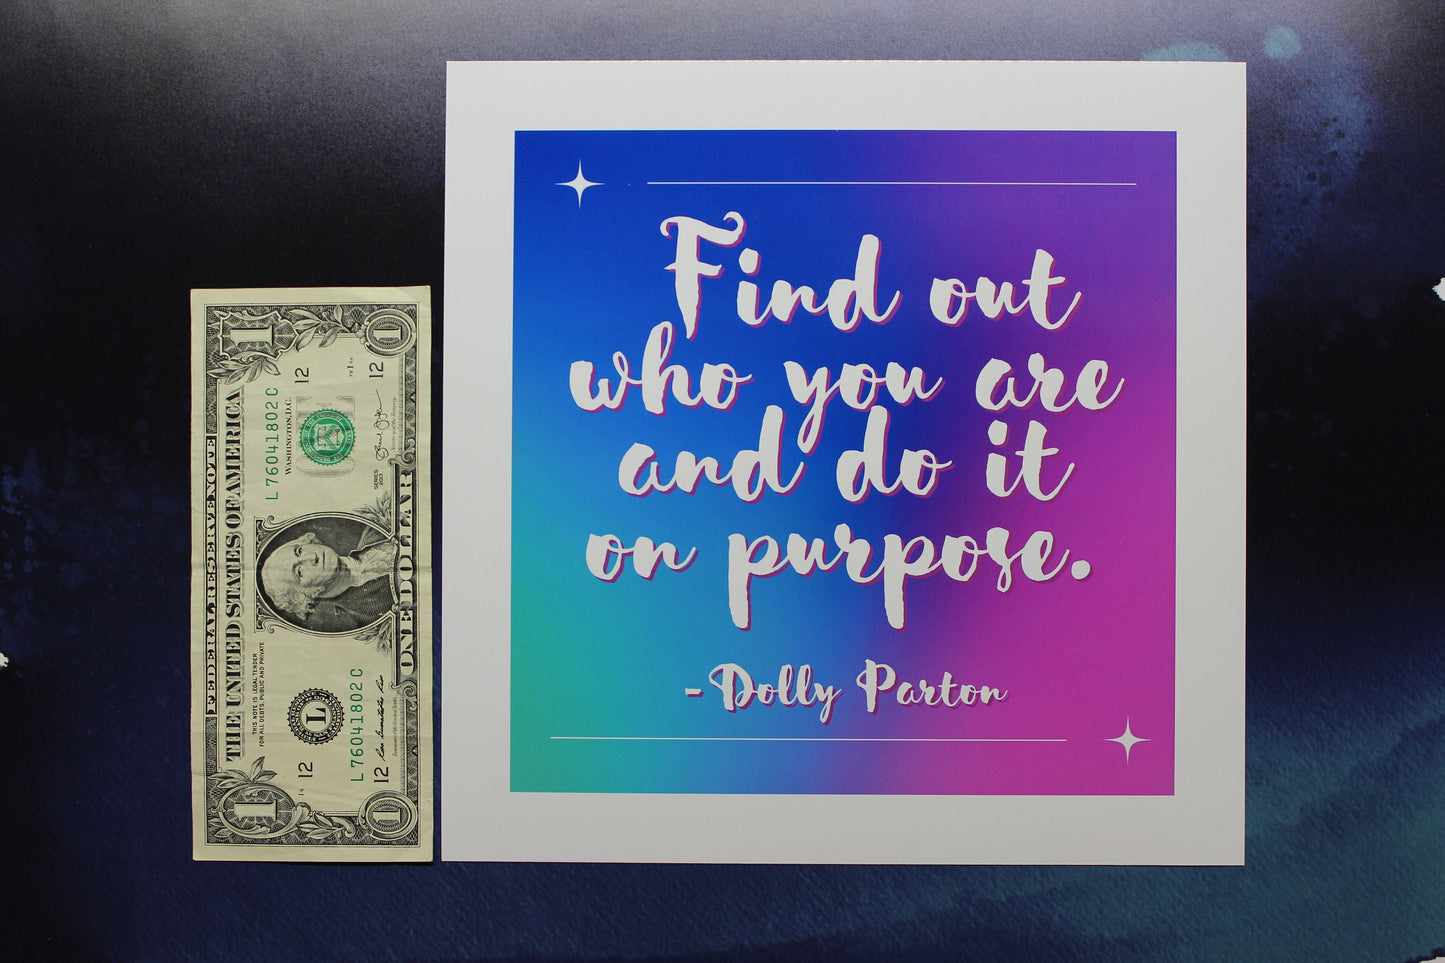 Dolly Parton Glossy Art Print Ready To Be Framed Find Out Who You Are And Do It On Purpose